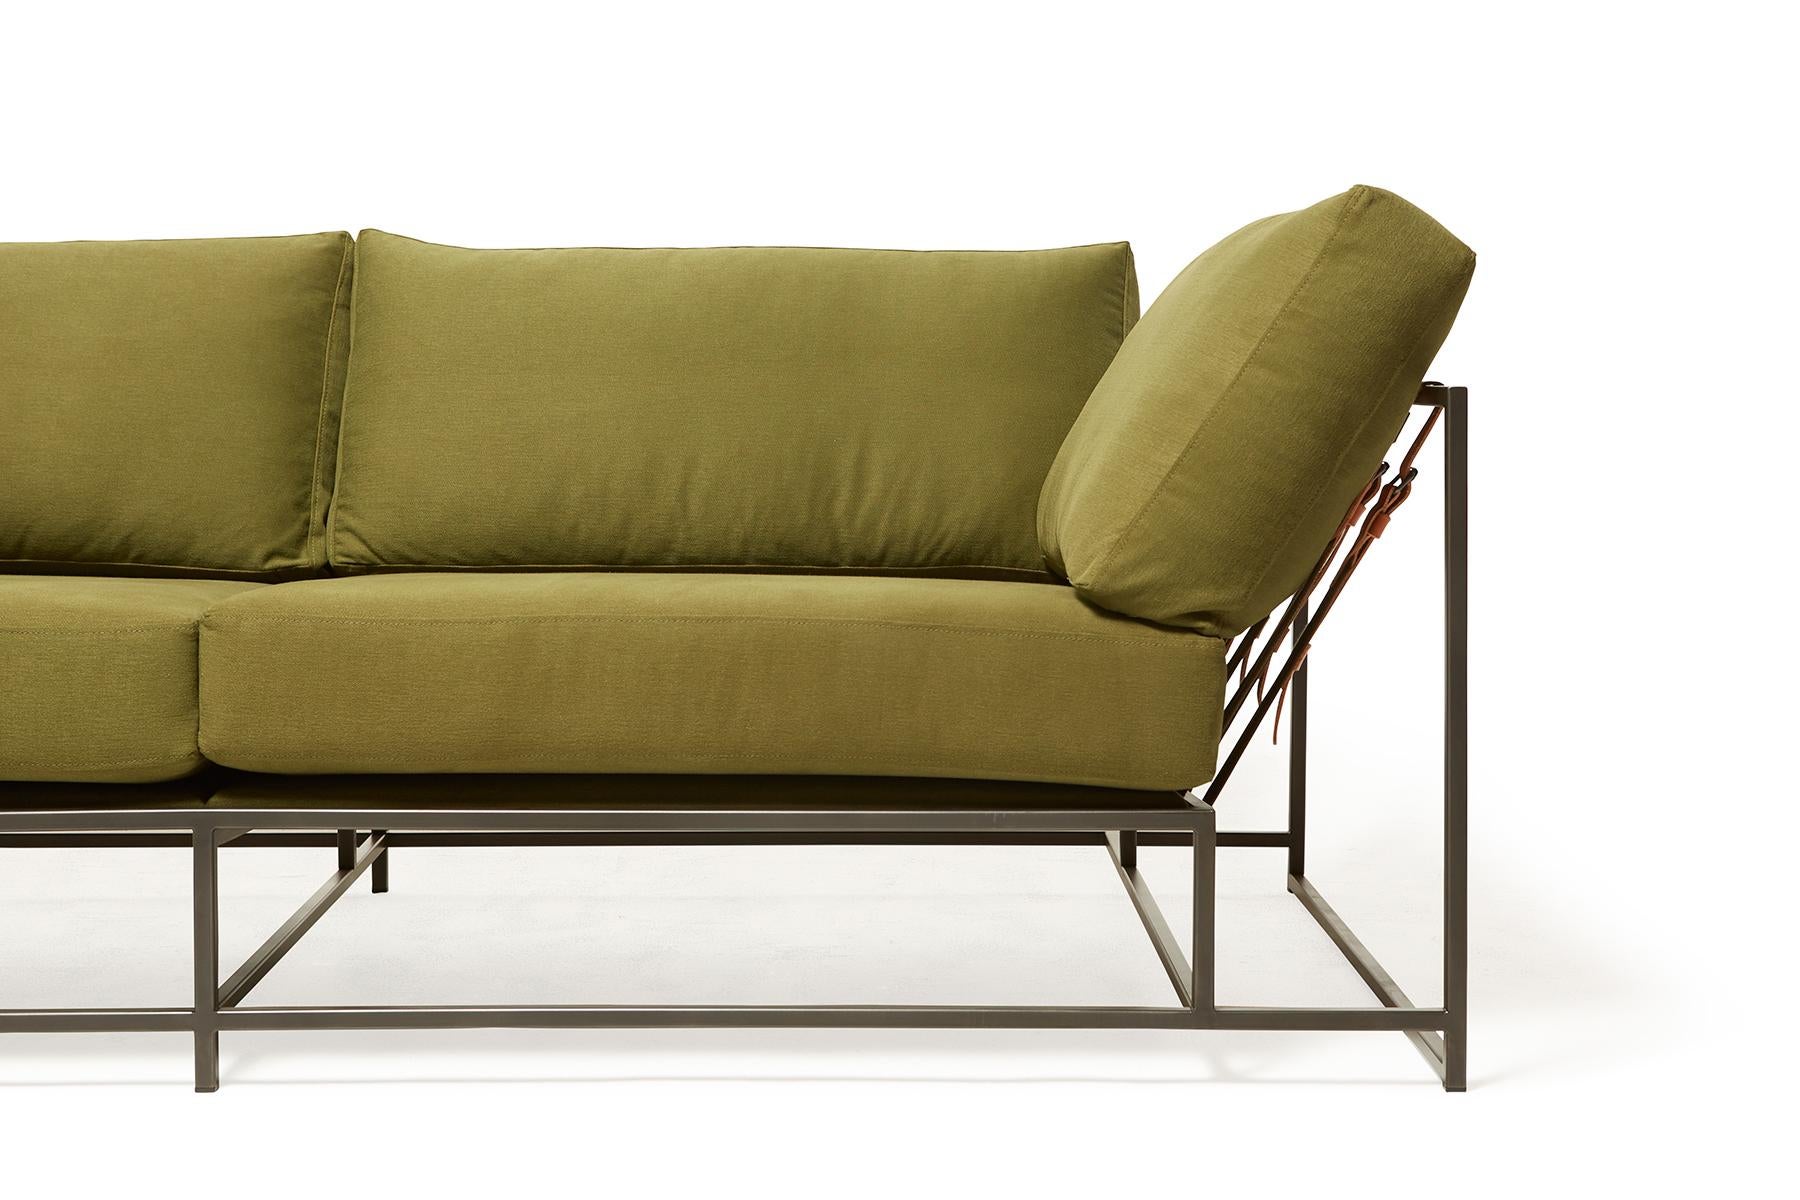 American Olive Twill Canvas and Blackened Steel Two-Seat Sofa For Sale